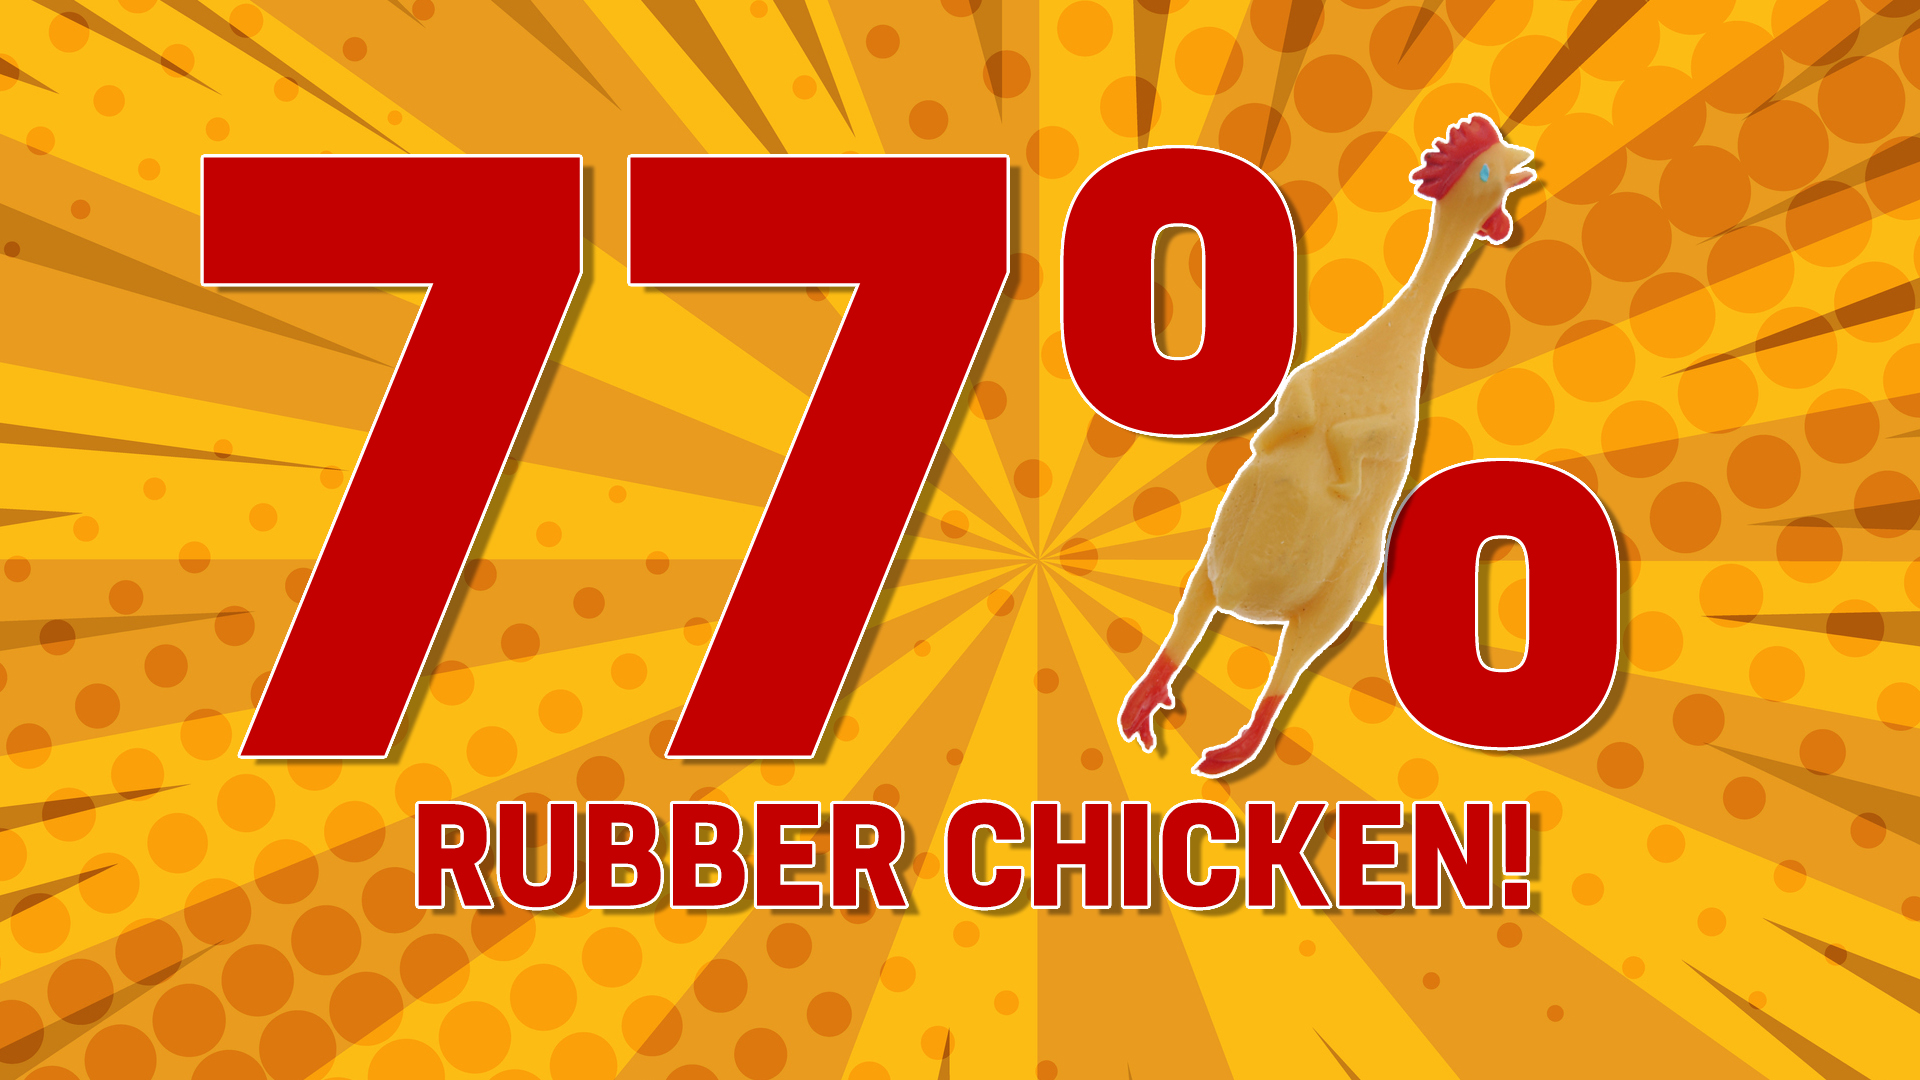 You are: 77% RUBBER CHICKEN!